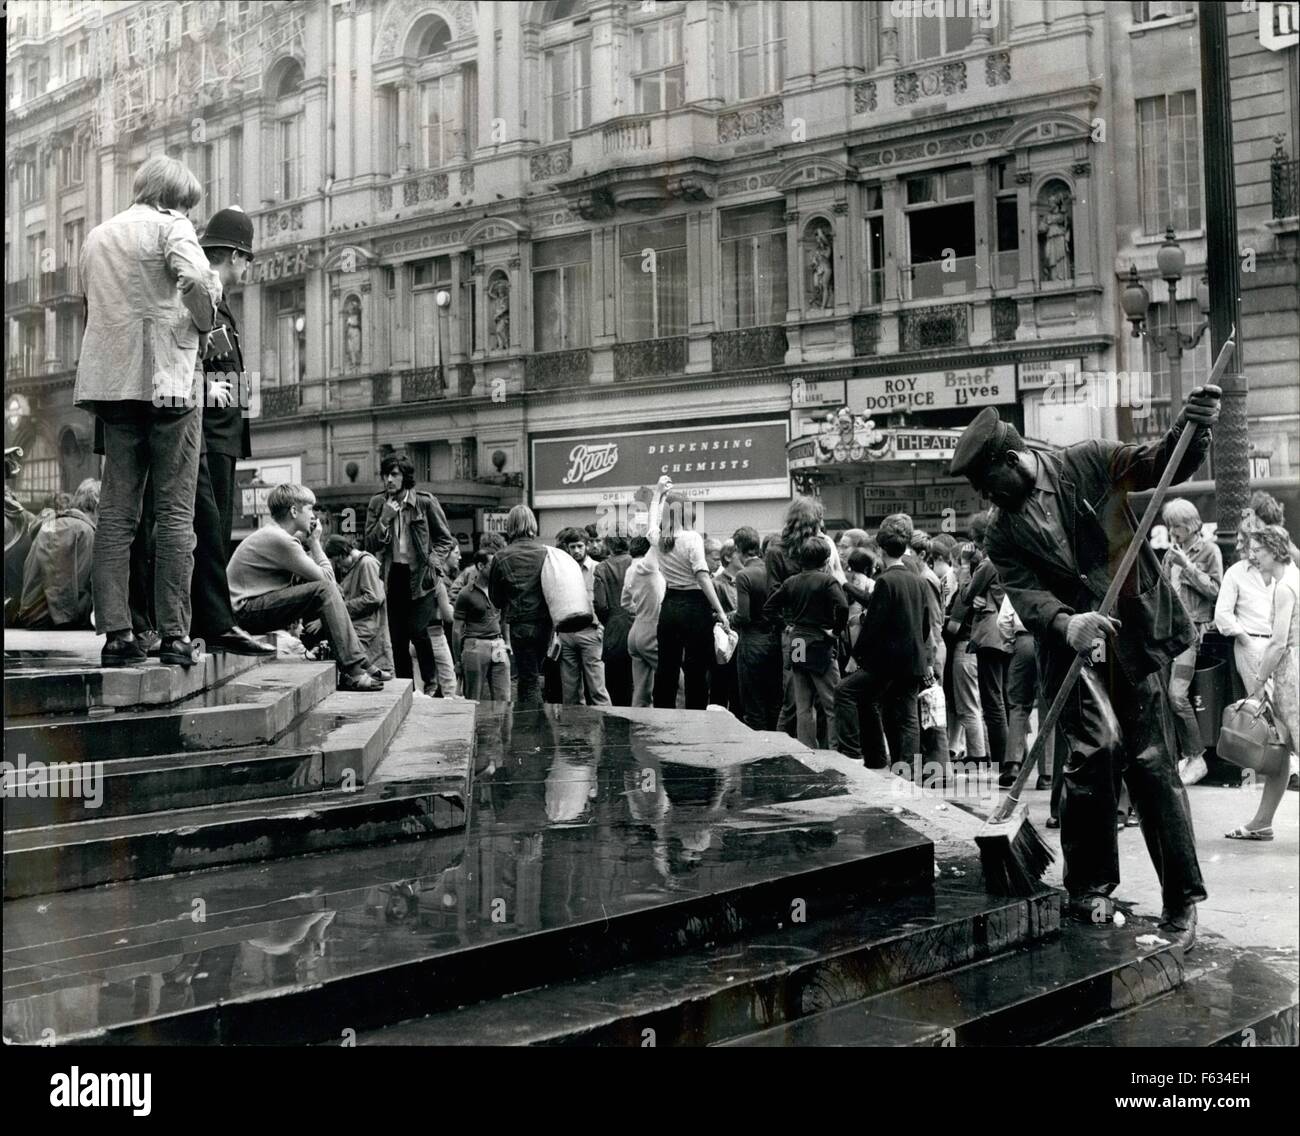 1968 - IS LONDON BECOMING SHAMEFUL? Piccadilly, Green Park, Leicester Square - places for London to be proud of - or to be ashamed of, For these are the places that have been virtually taken over by crowds of hippies, beatniks and dropouts. Day and night they are to be found littering ''Eros Island'' - the area surrounding the Eros Statue, London's most famous landmark, at Piccadilly Circus. Lounging around the steps and pavements they will spend the entire day there, young people from all over the world, until the police move them on - generally to what has become a shanty town - Green Park, Stock Photo